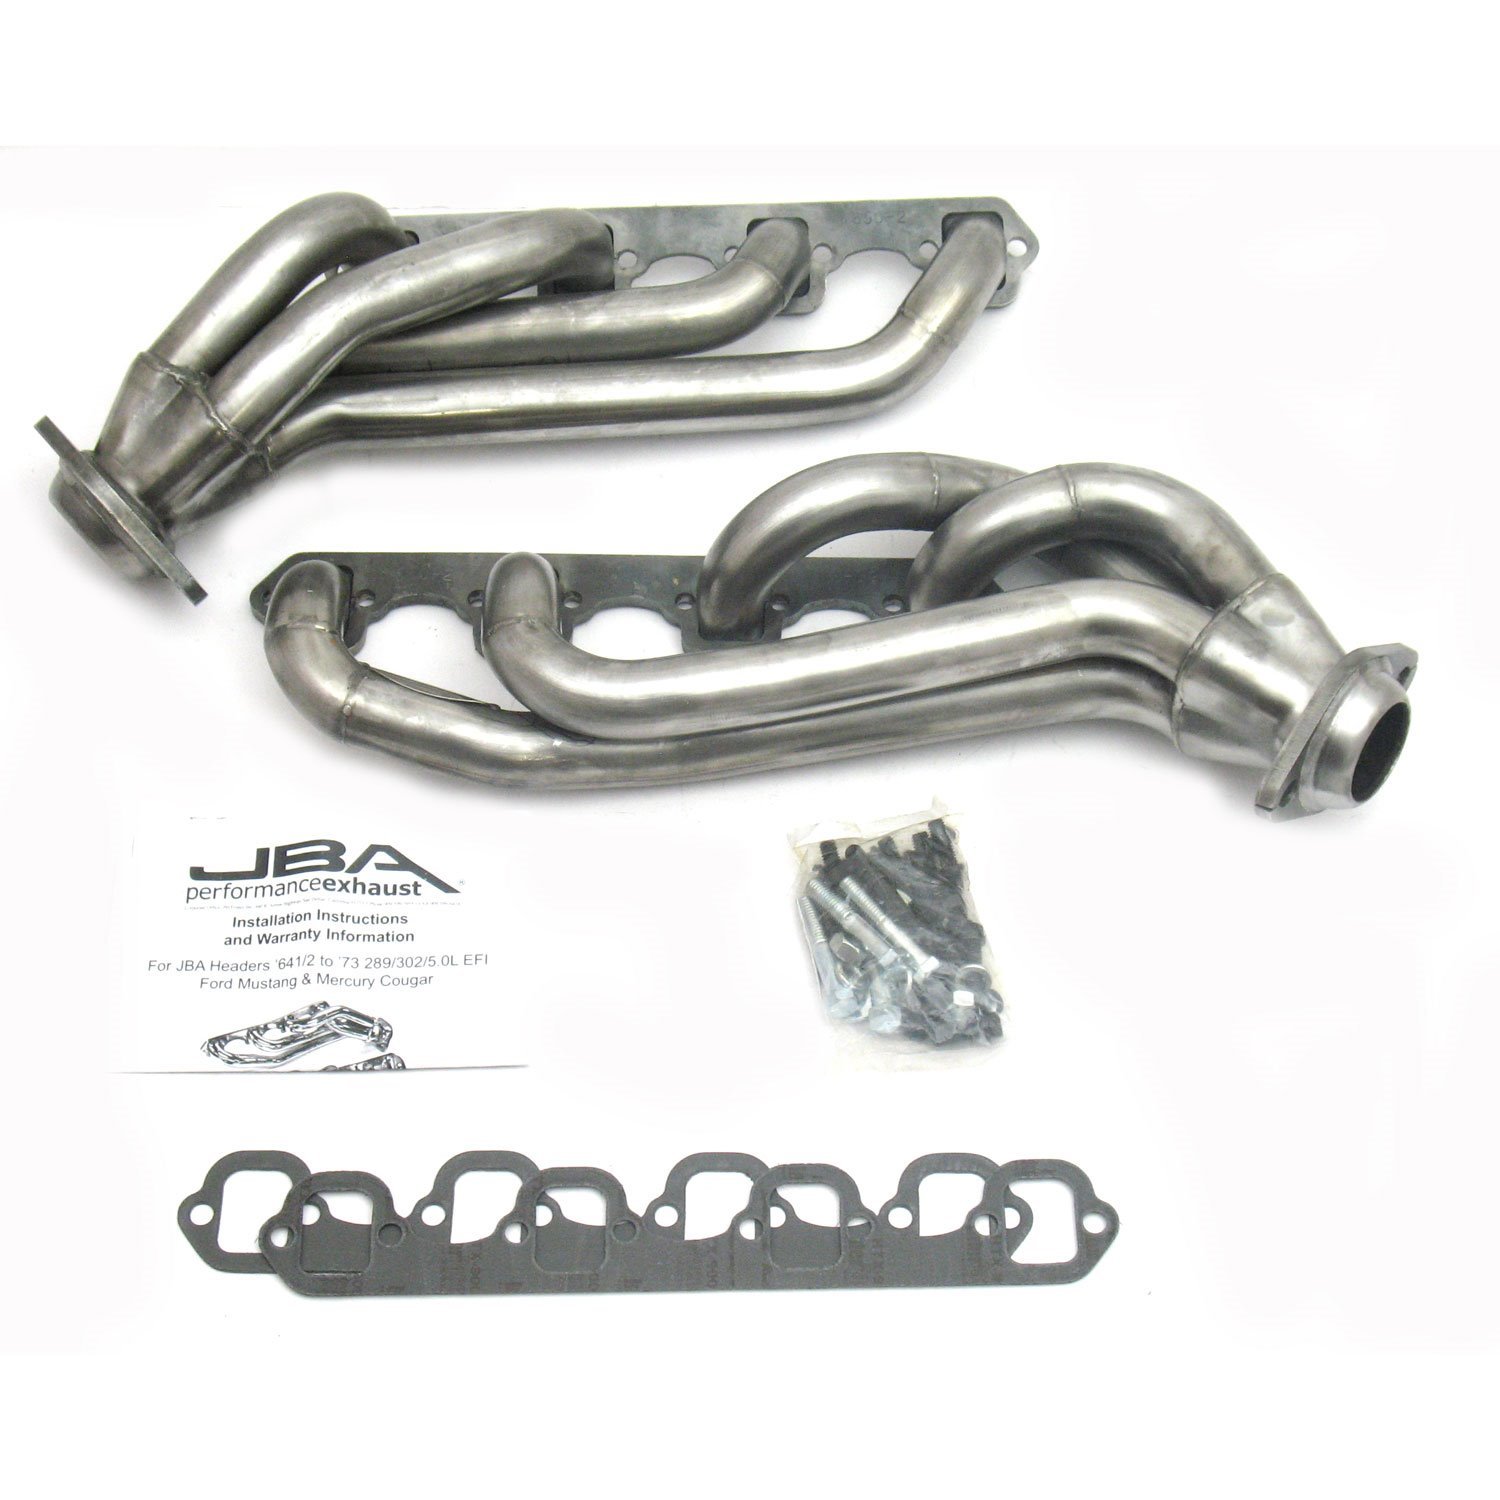 Ford shorty headers #6